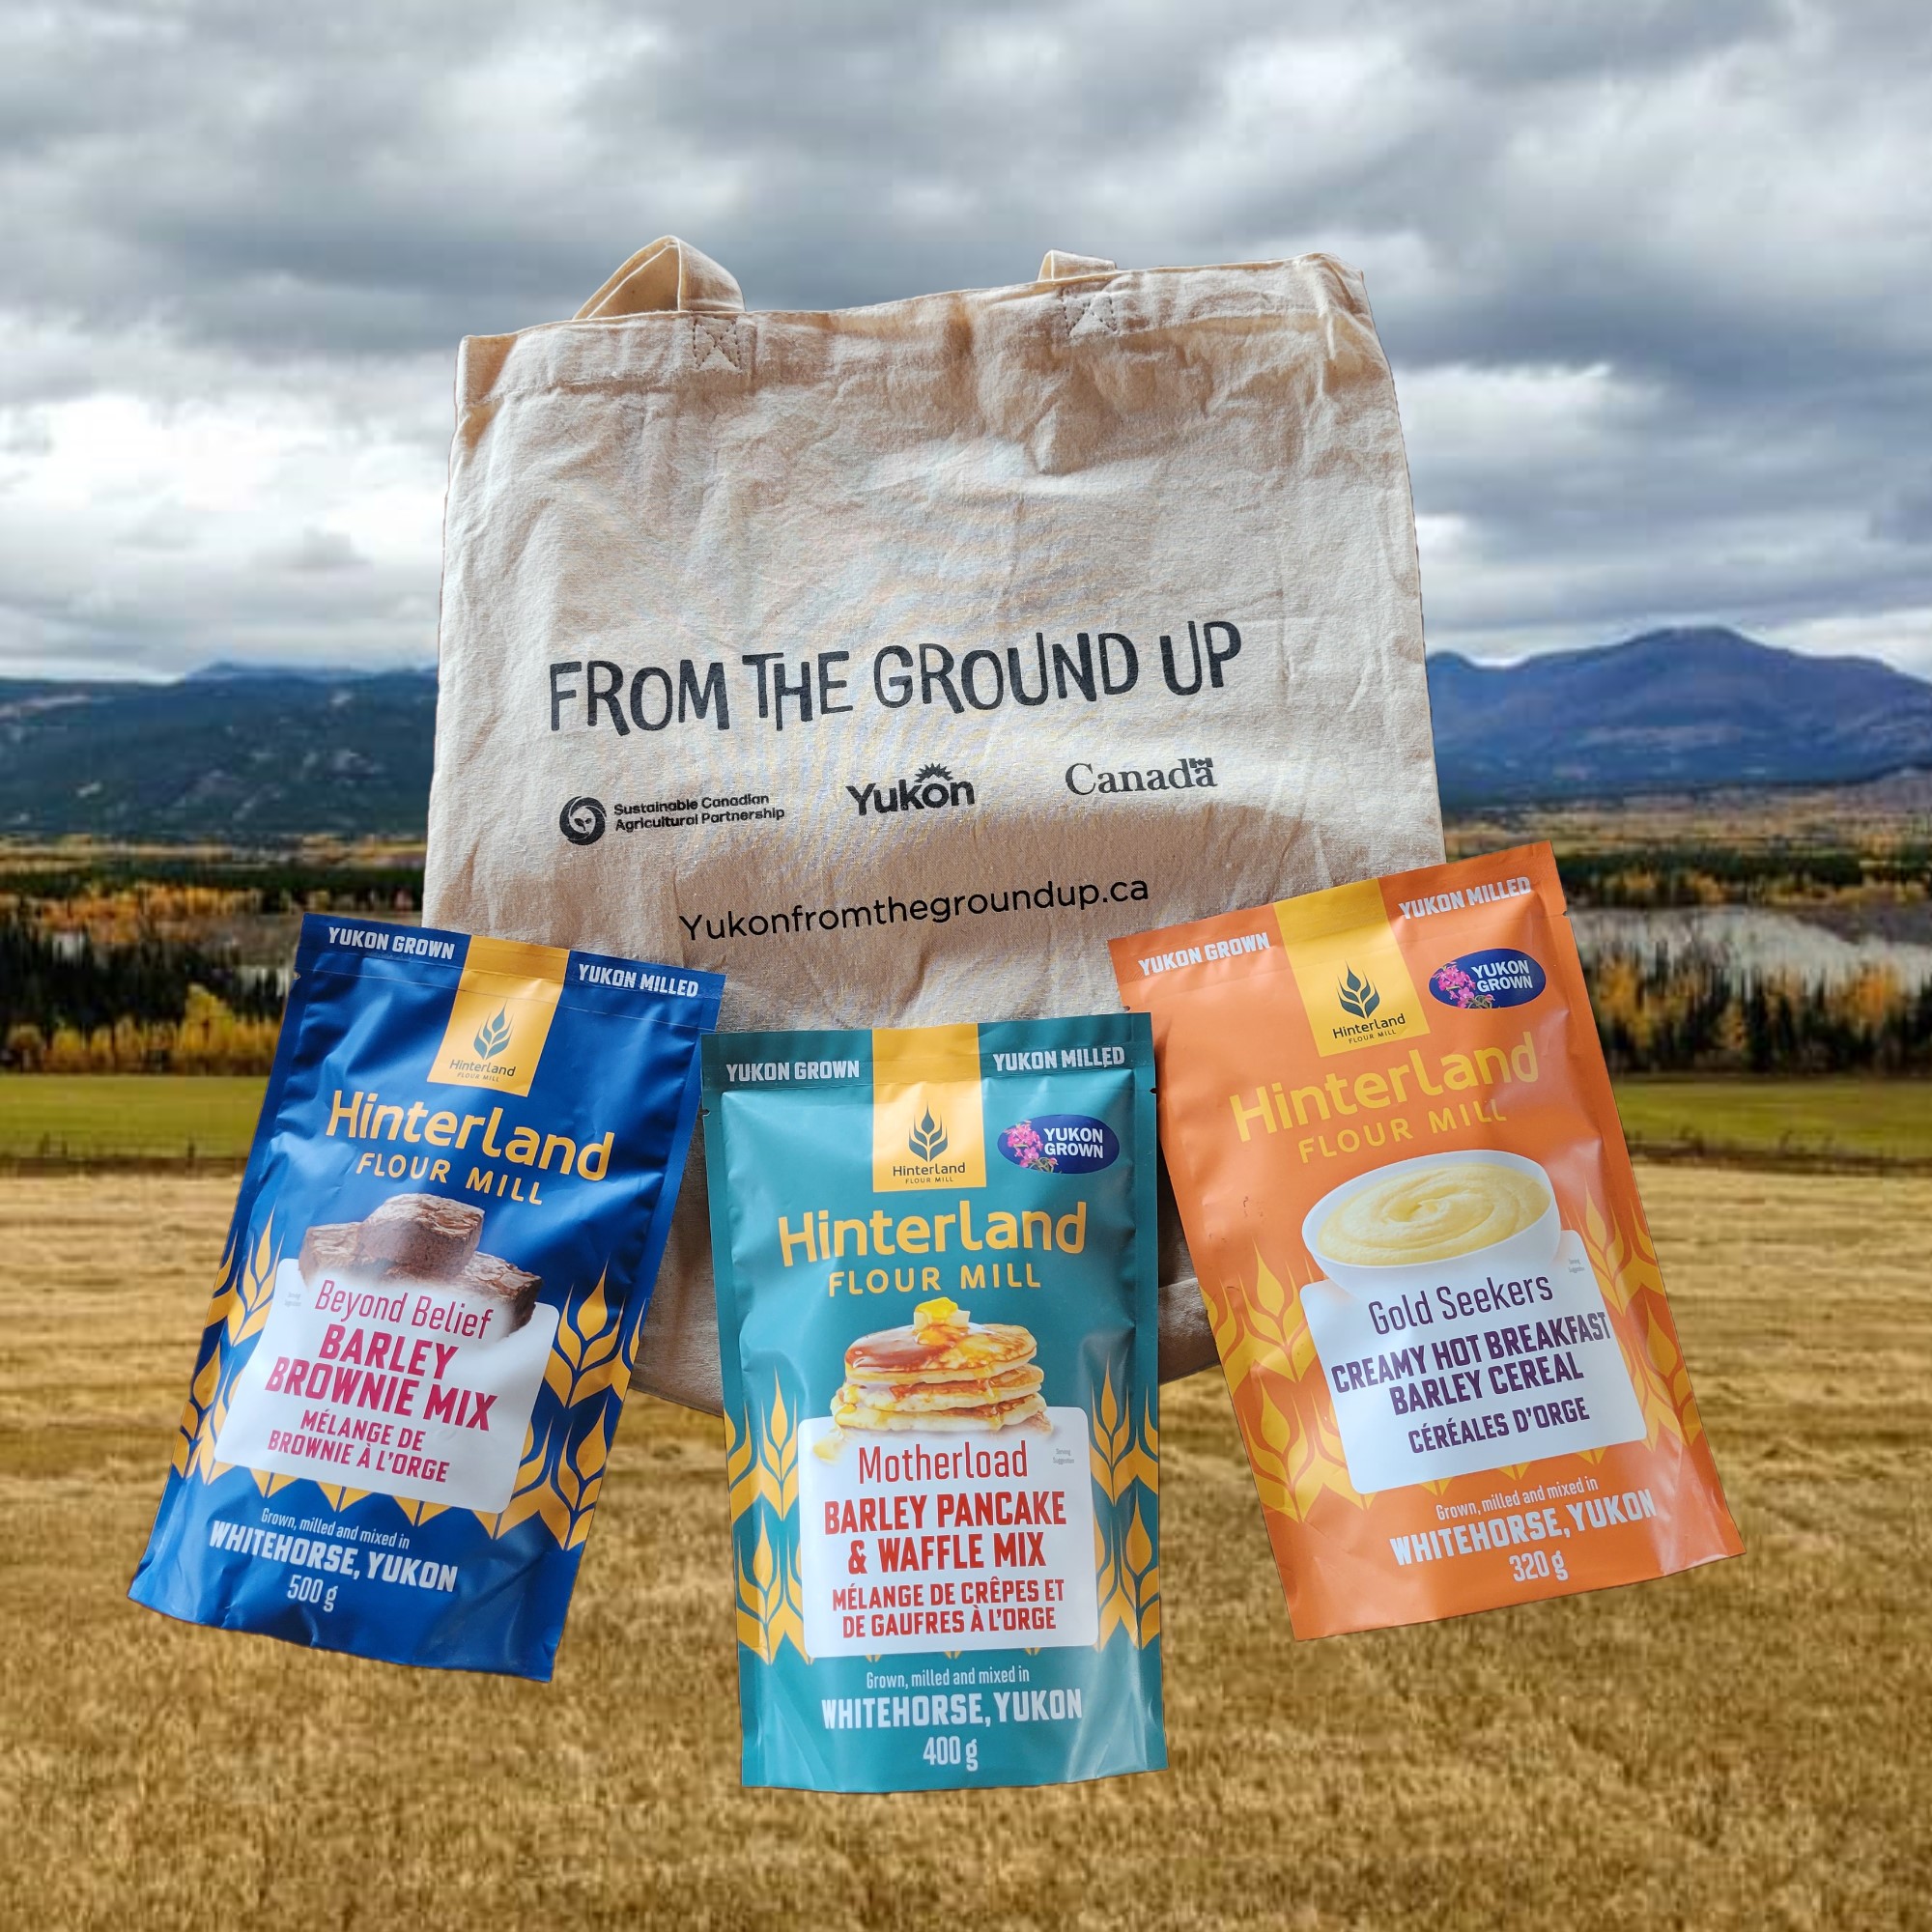 From the ground up hero image showing Hinterland products